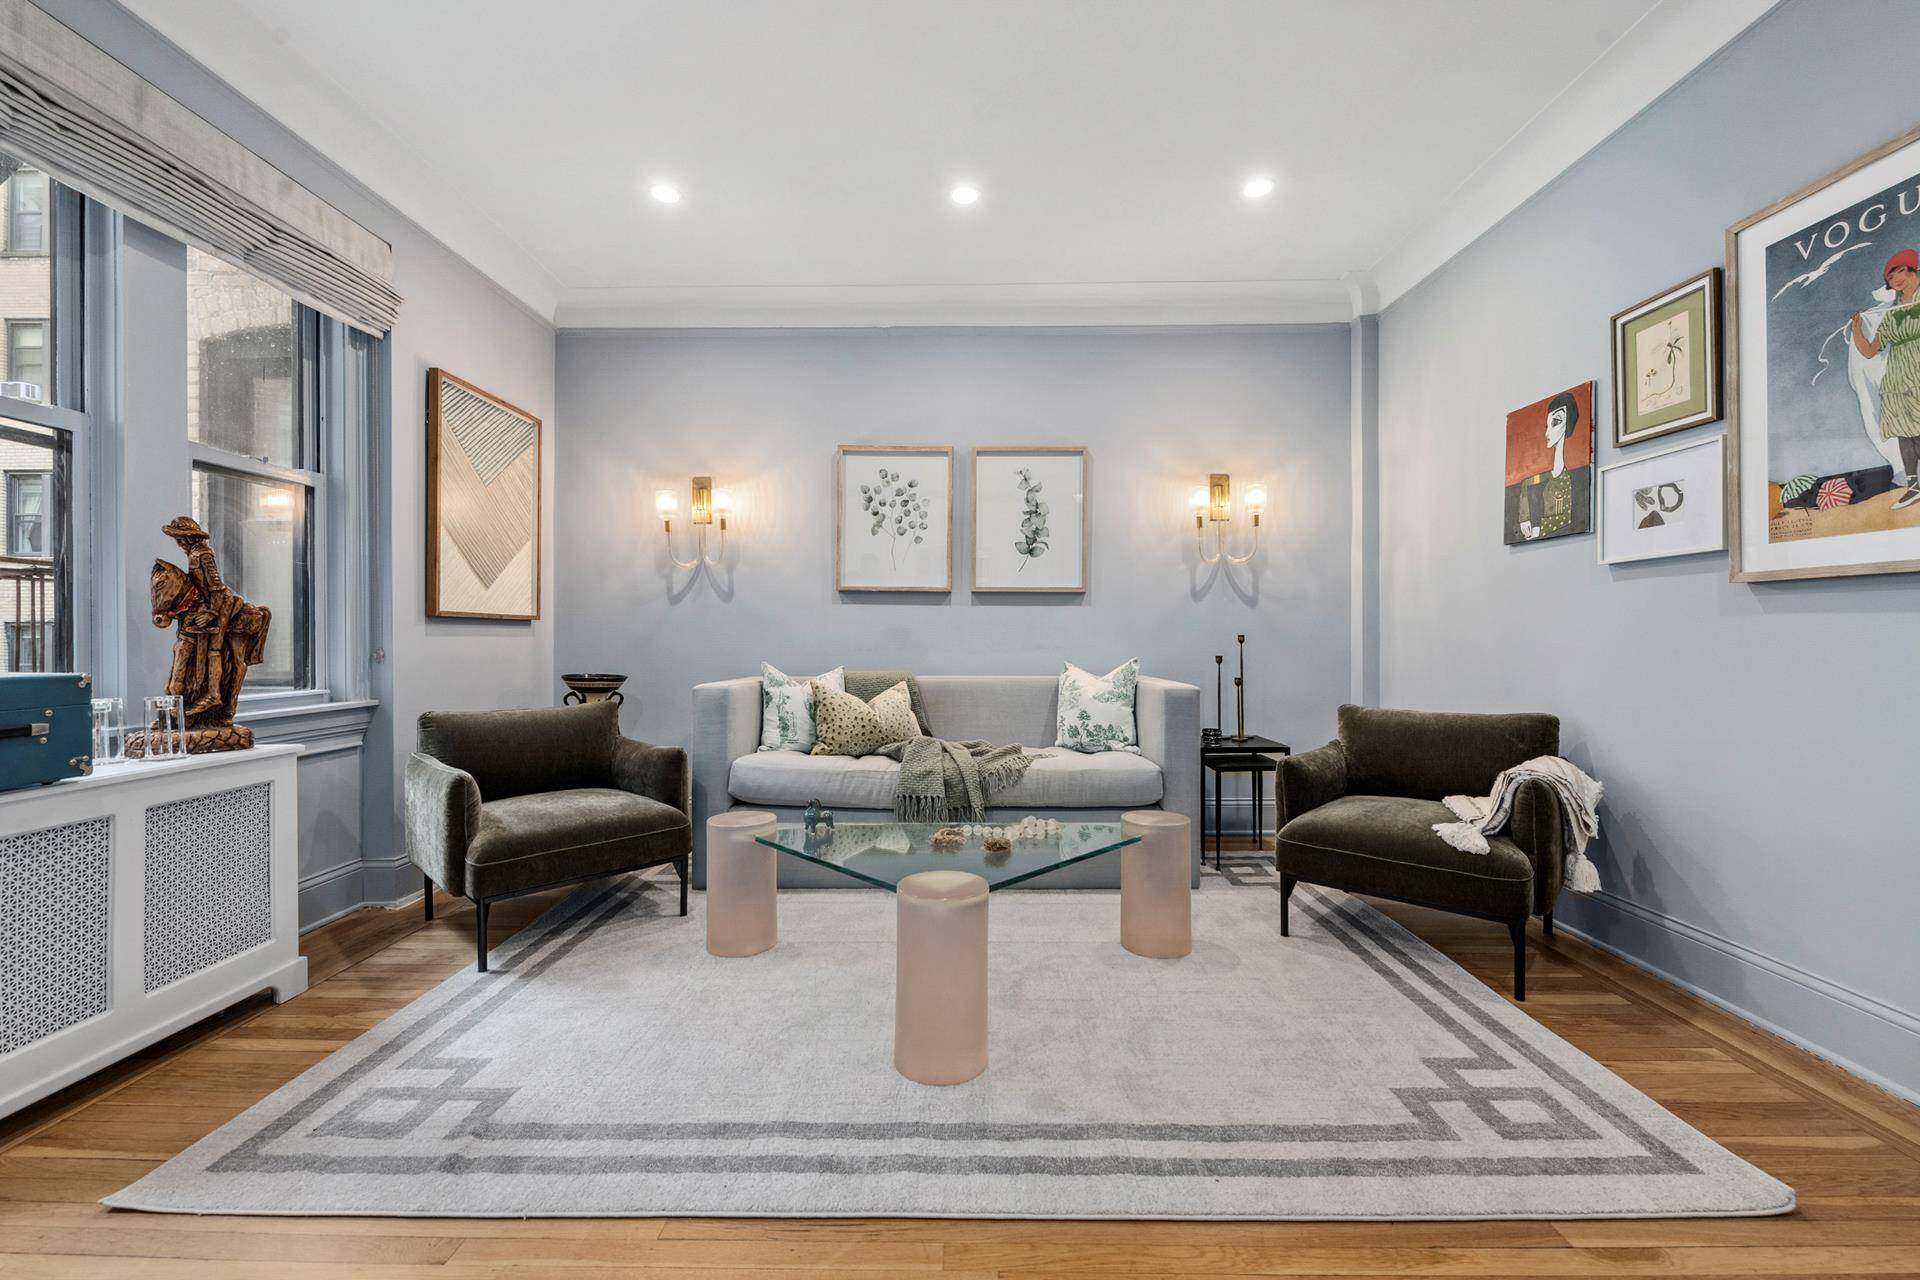 Residence 3A is a bright and beautifully renovated one bedroom, one bathroom apartment and is located on a picturesque, tree lined block in the heart of Historic North Park Slope.